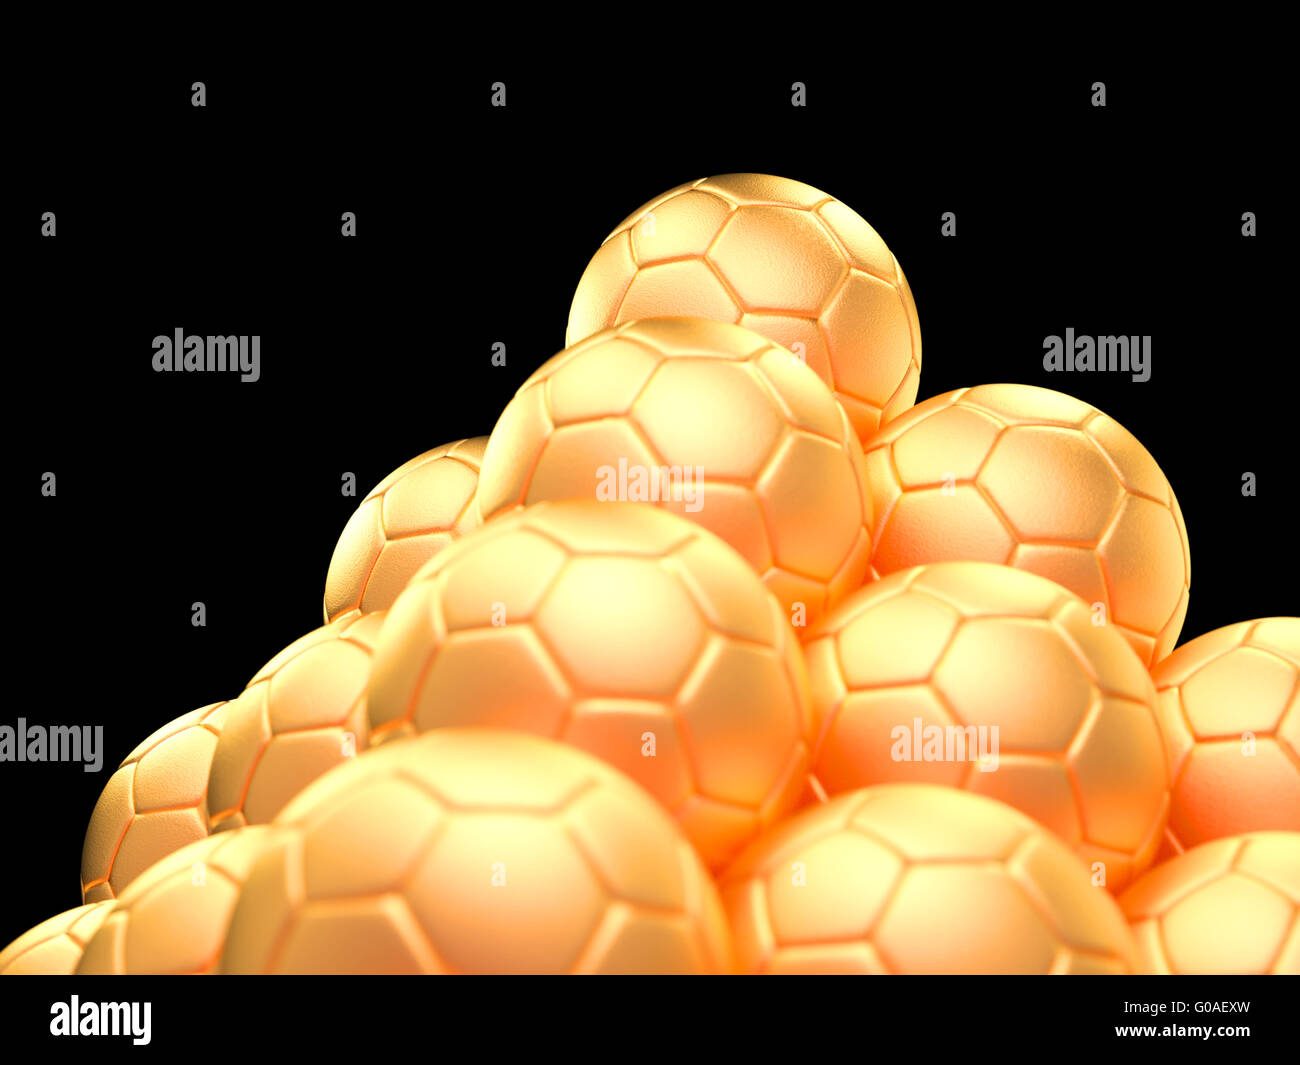 Close up of a pyramid made out of golden soccer balls Stock Photo